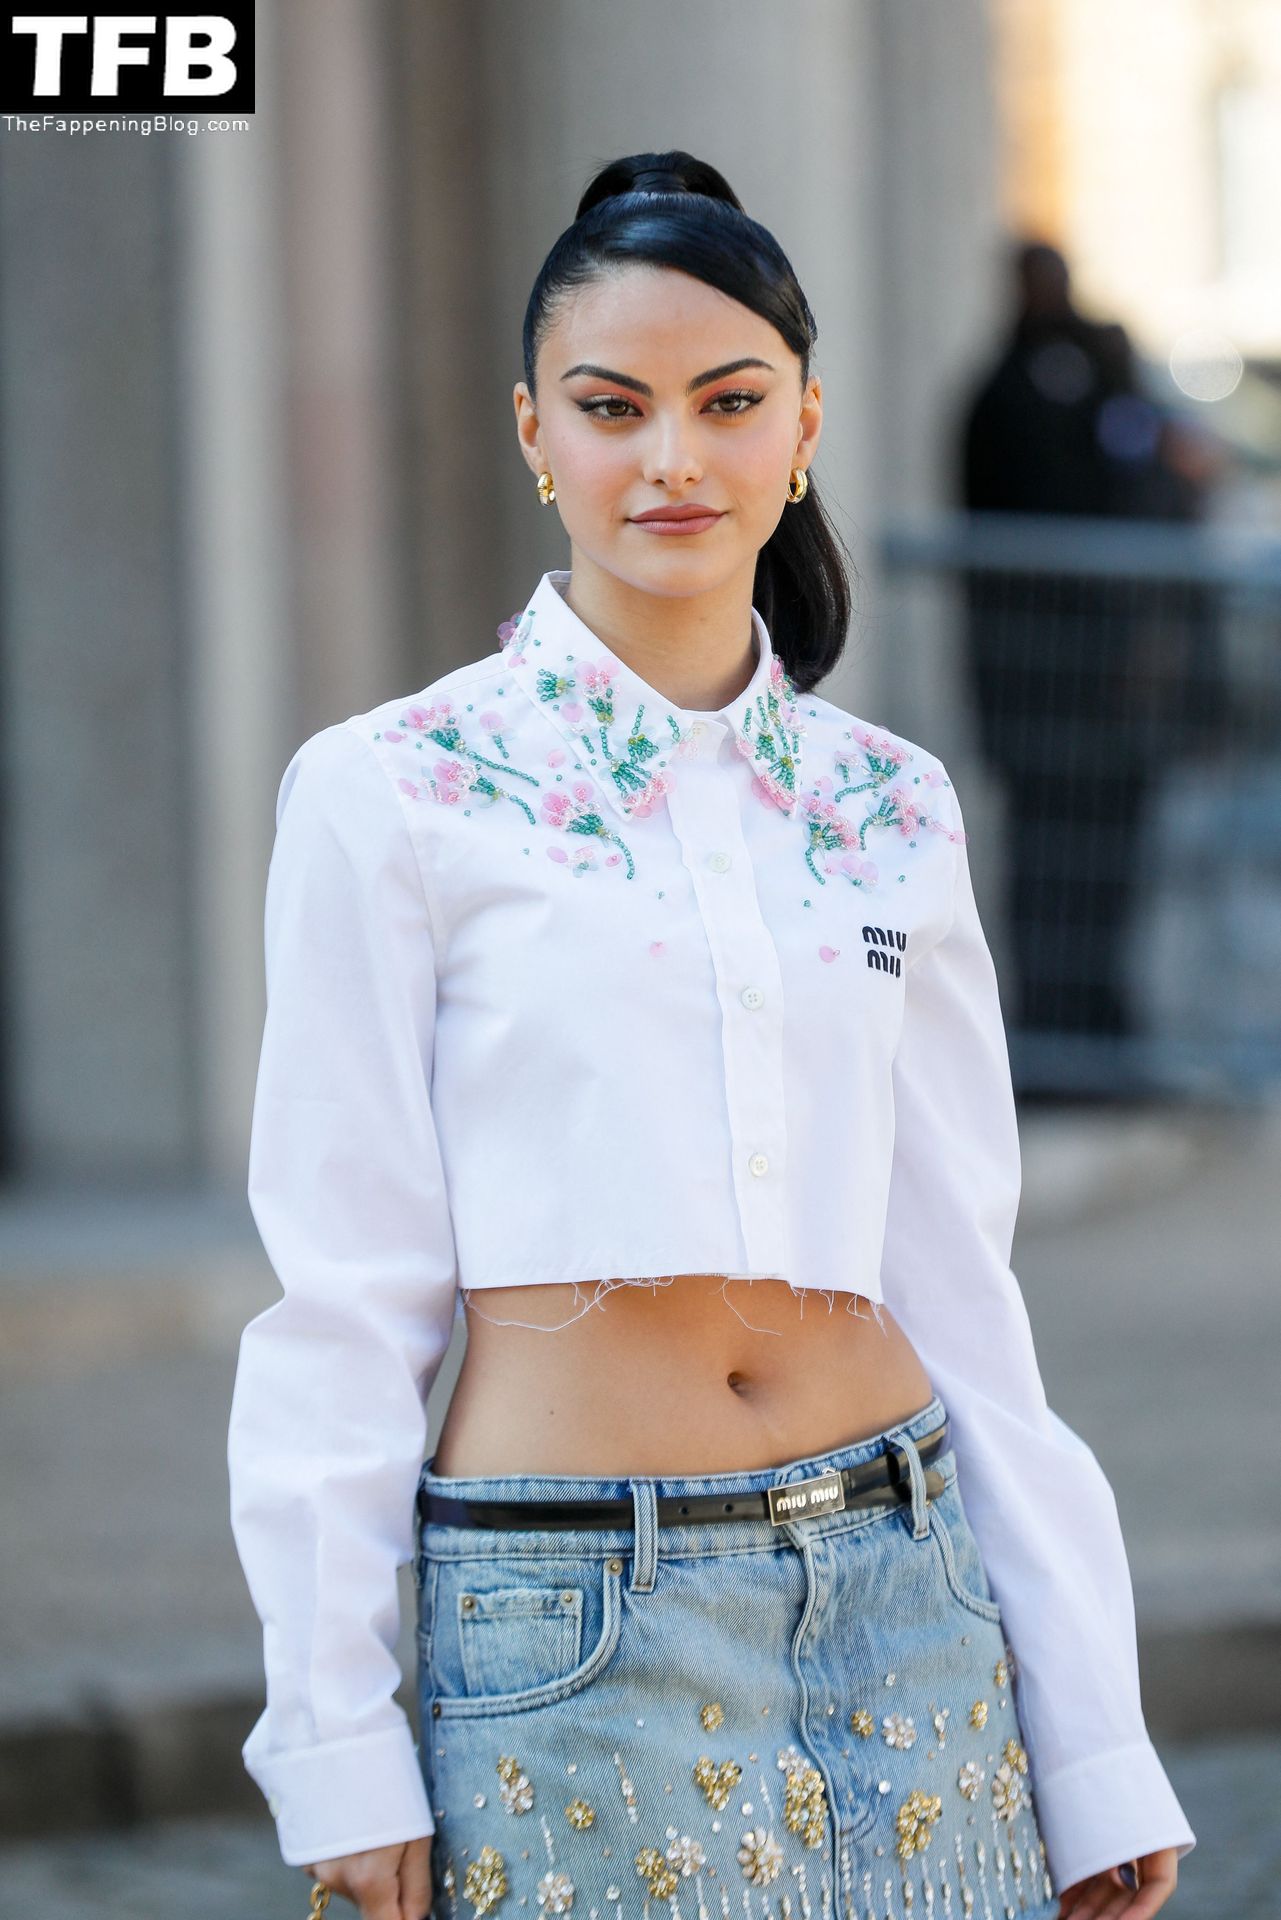 Camila-Mendes-Sexy-The-Fappening-Blog-135.jpg